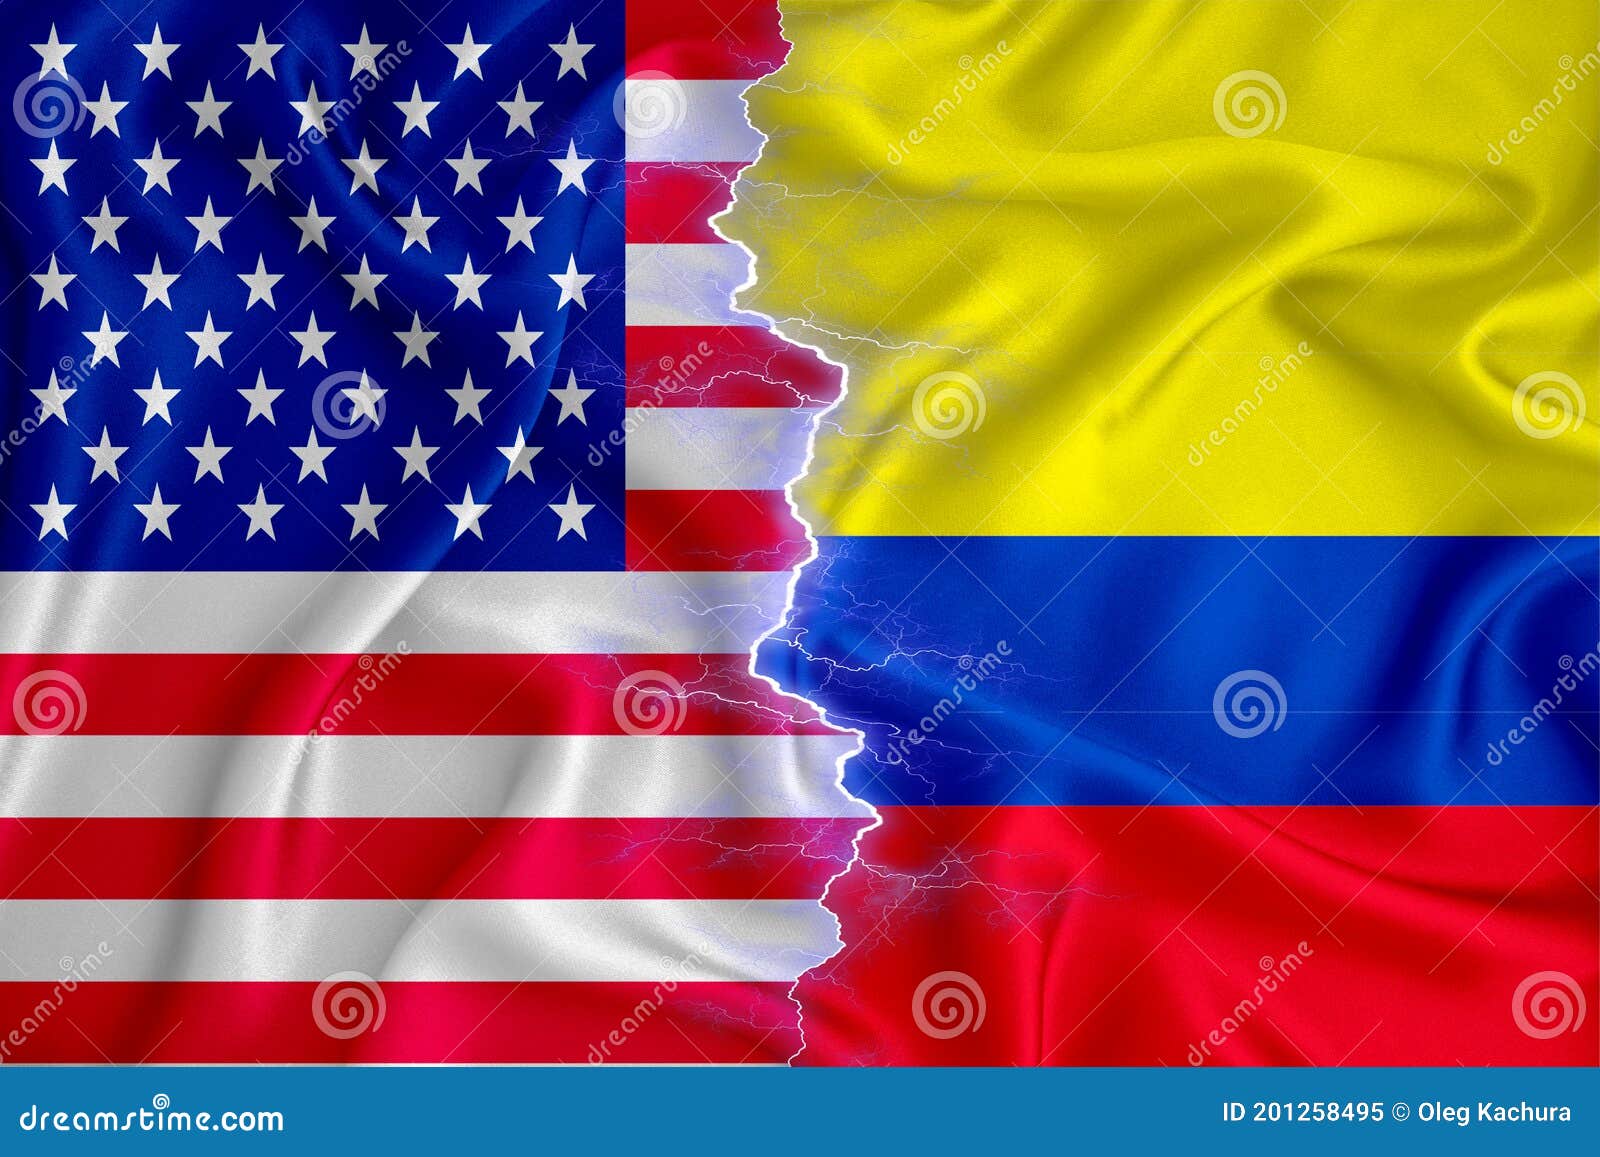 Colombia and US Flag on Zipper Crossed Textured Fabric. the Concept of  Cooperation between the Two Countries Stock Image - Image of friendship,  cooperation: 201258495